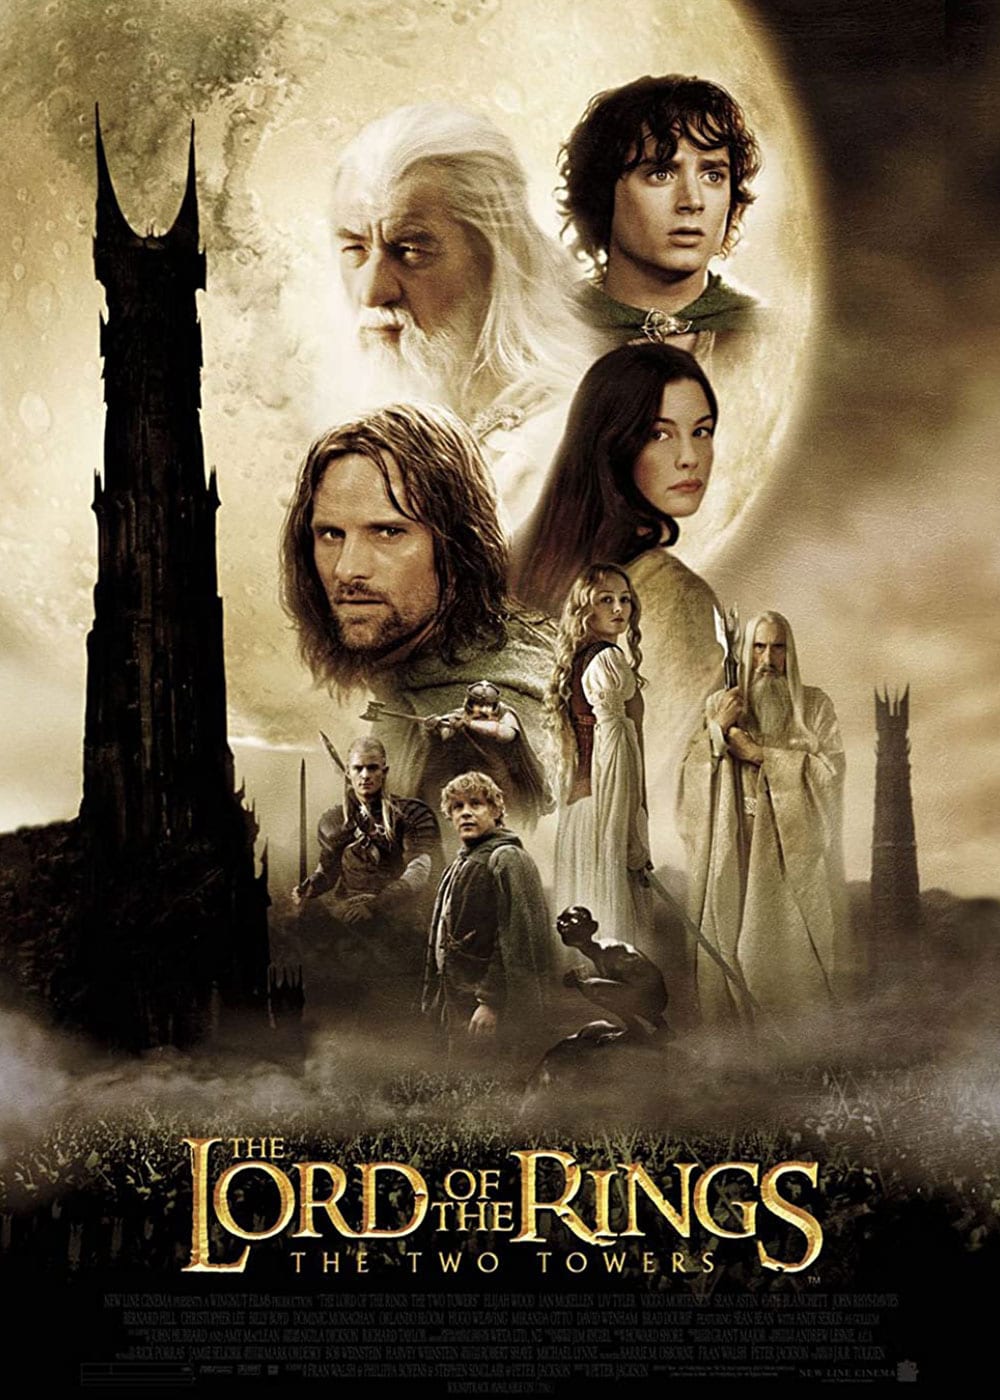 The Lord of the Rings: The Return of the King (2003) - Connections - IMDb